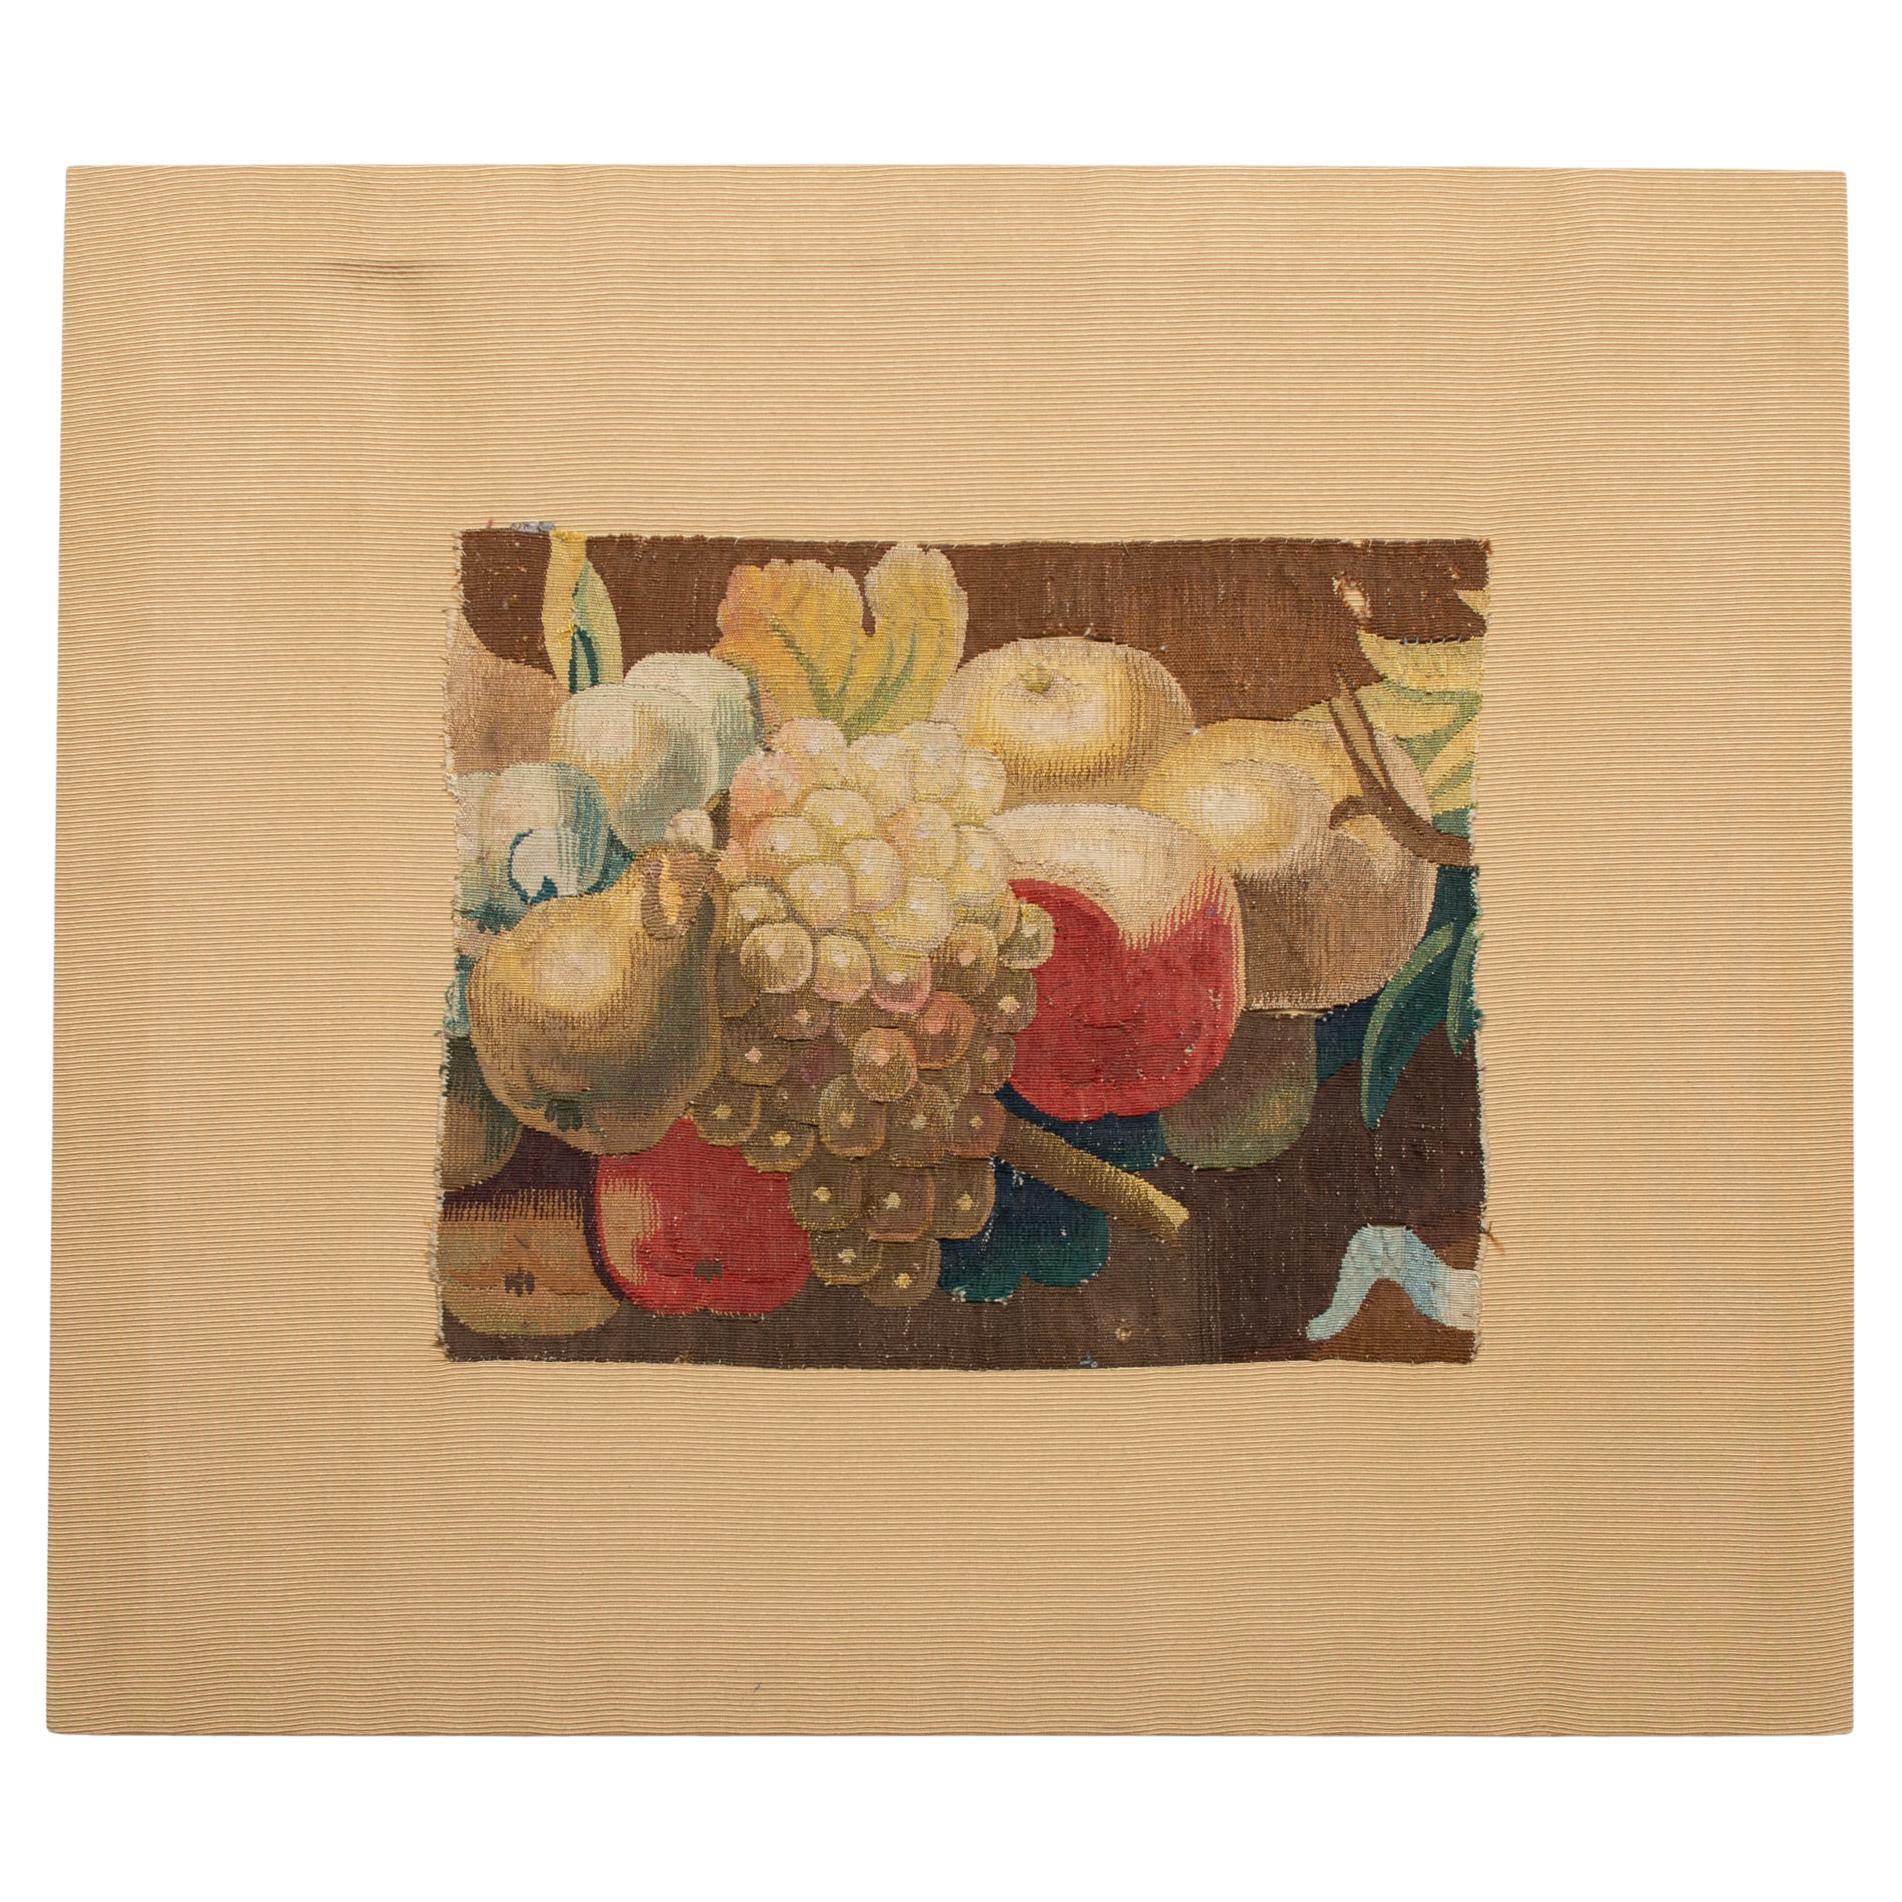 Tapestry Fragment with Fruits on Panel